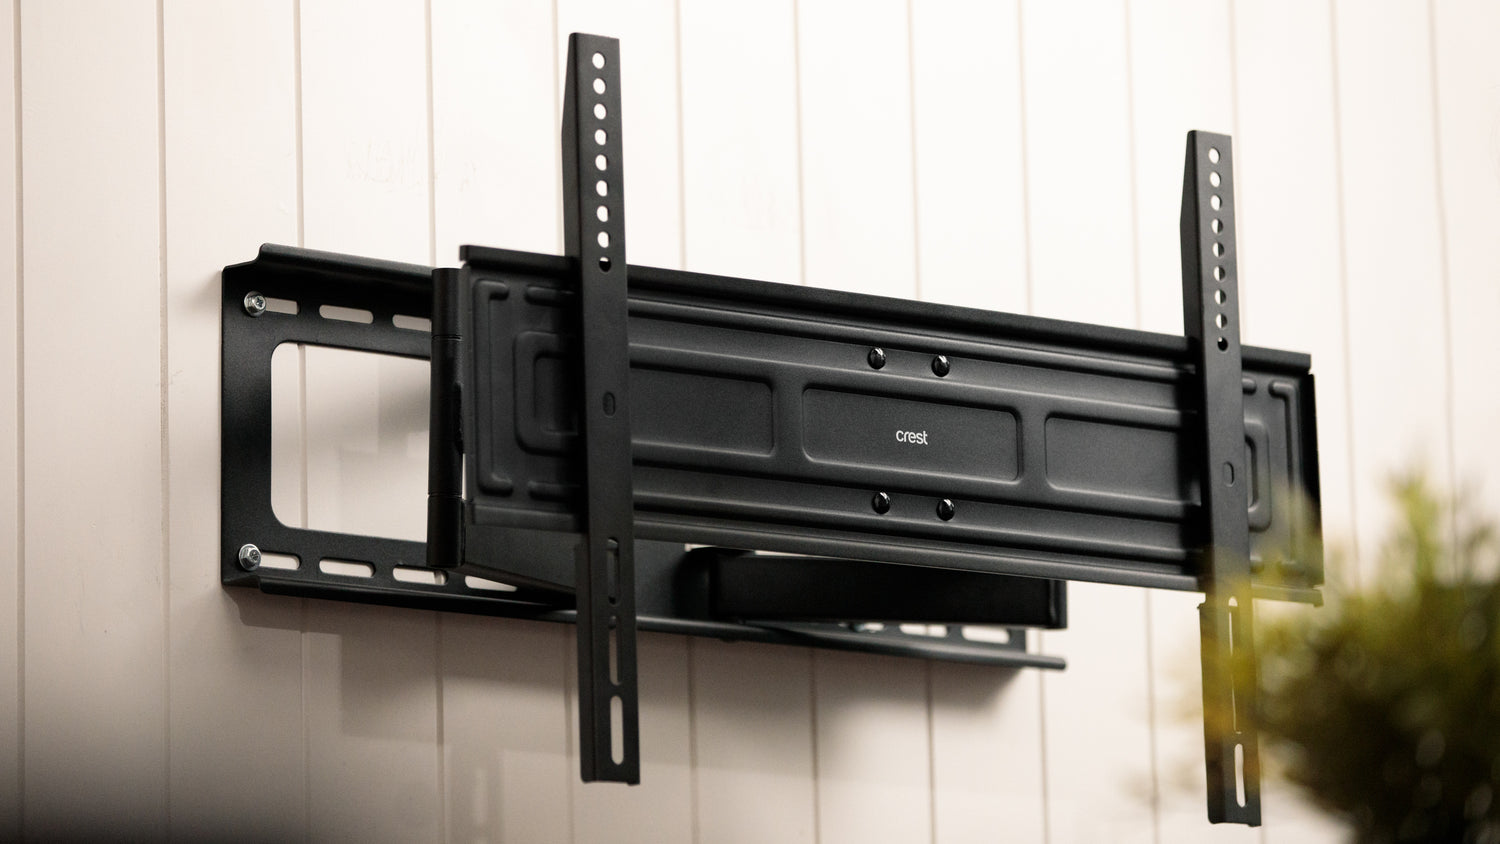 What is a full motion TV wall mount and why do I need one?